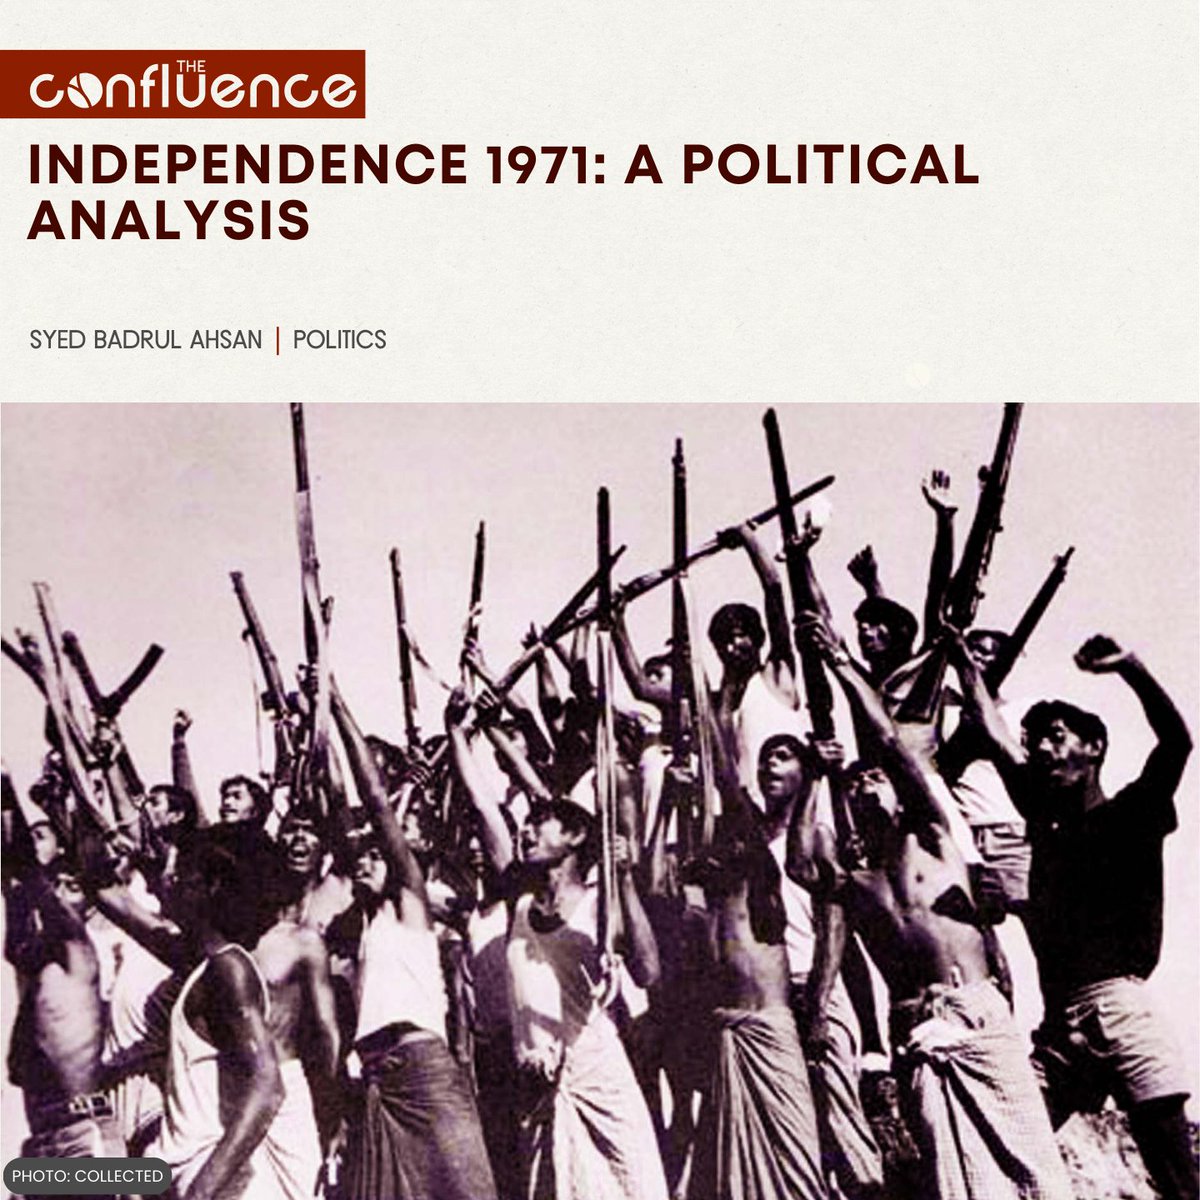 #Bangladesh gained #independence through a #LiberationWar, unlike 🇳🇪 & 🇵🇰 who negotiated their independence. 🇧🇩 was in no way a successor state of 🇵🇰, rather a vision that emerged from years of subjugation.

Read S. Ahsan's take on #IndependenceDay here 👇
theconfluence.blog/independence-1…